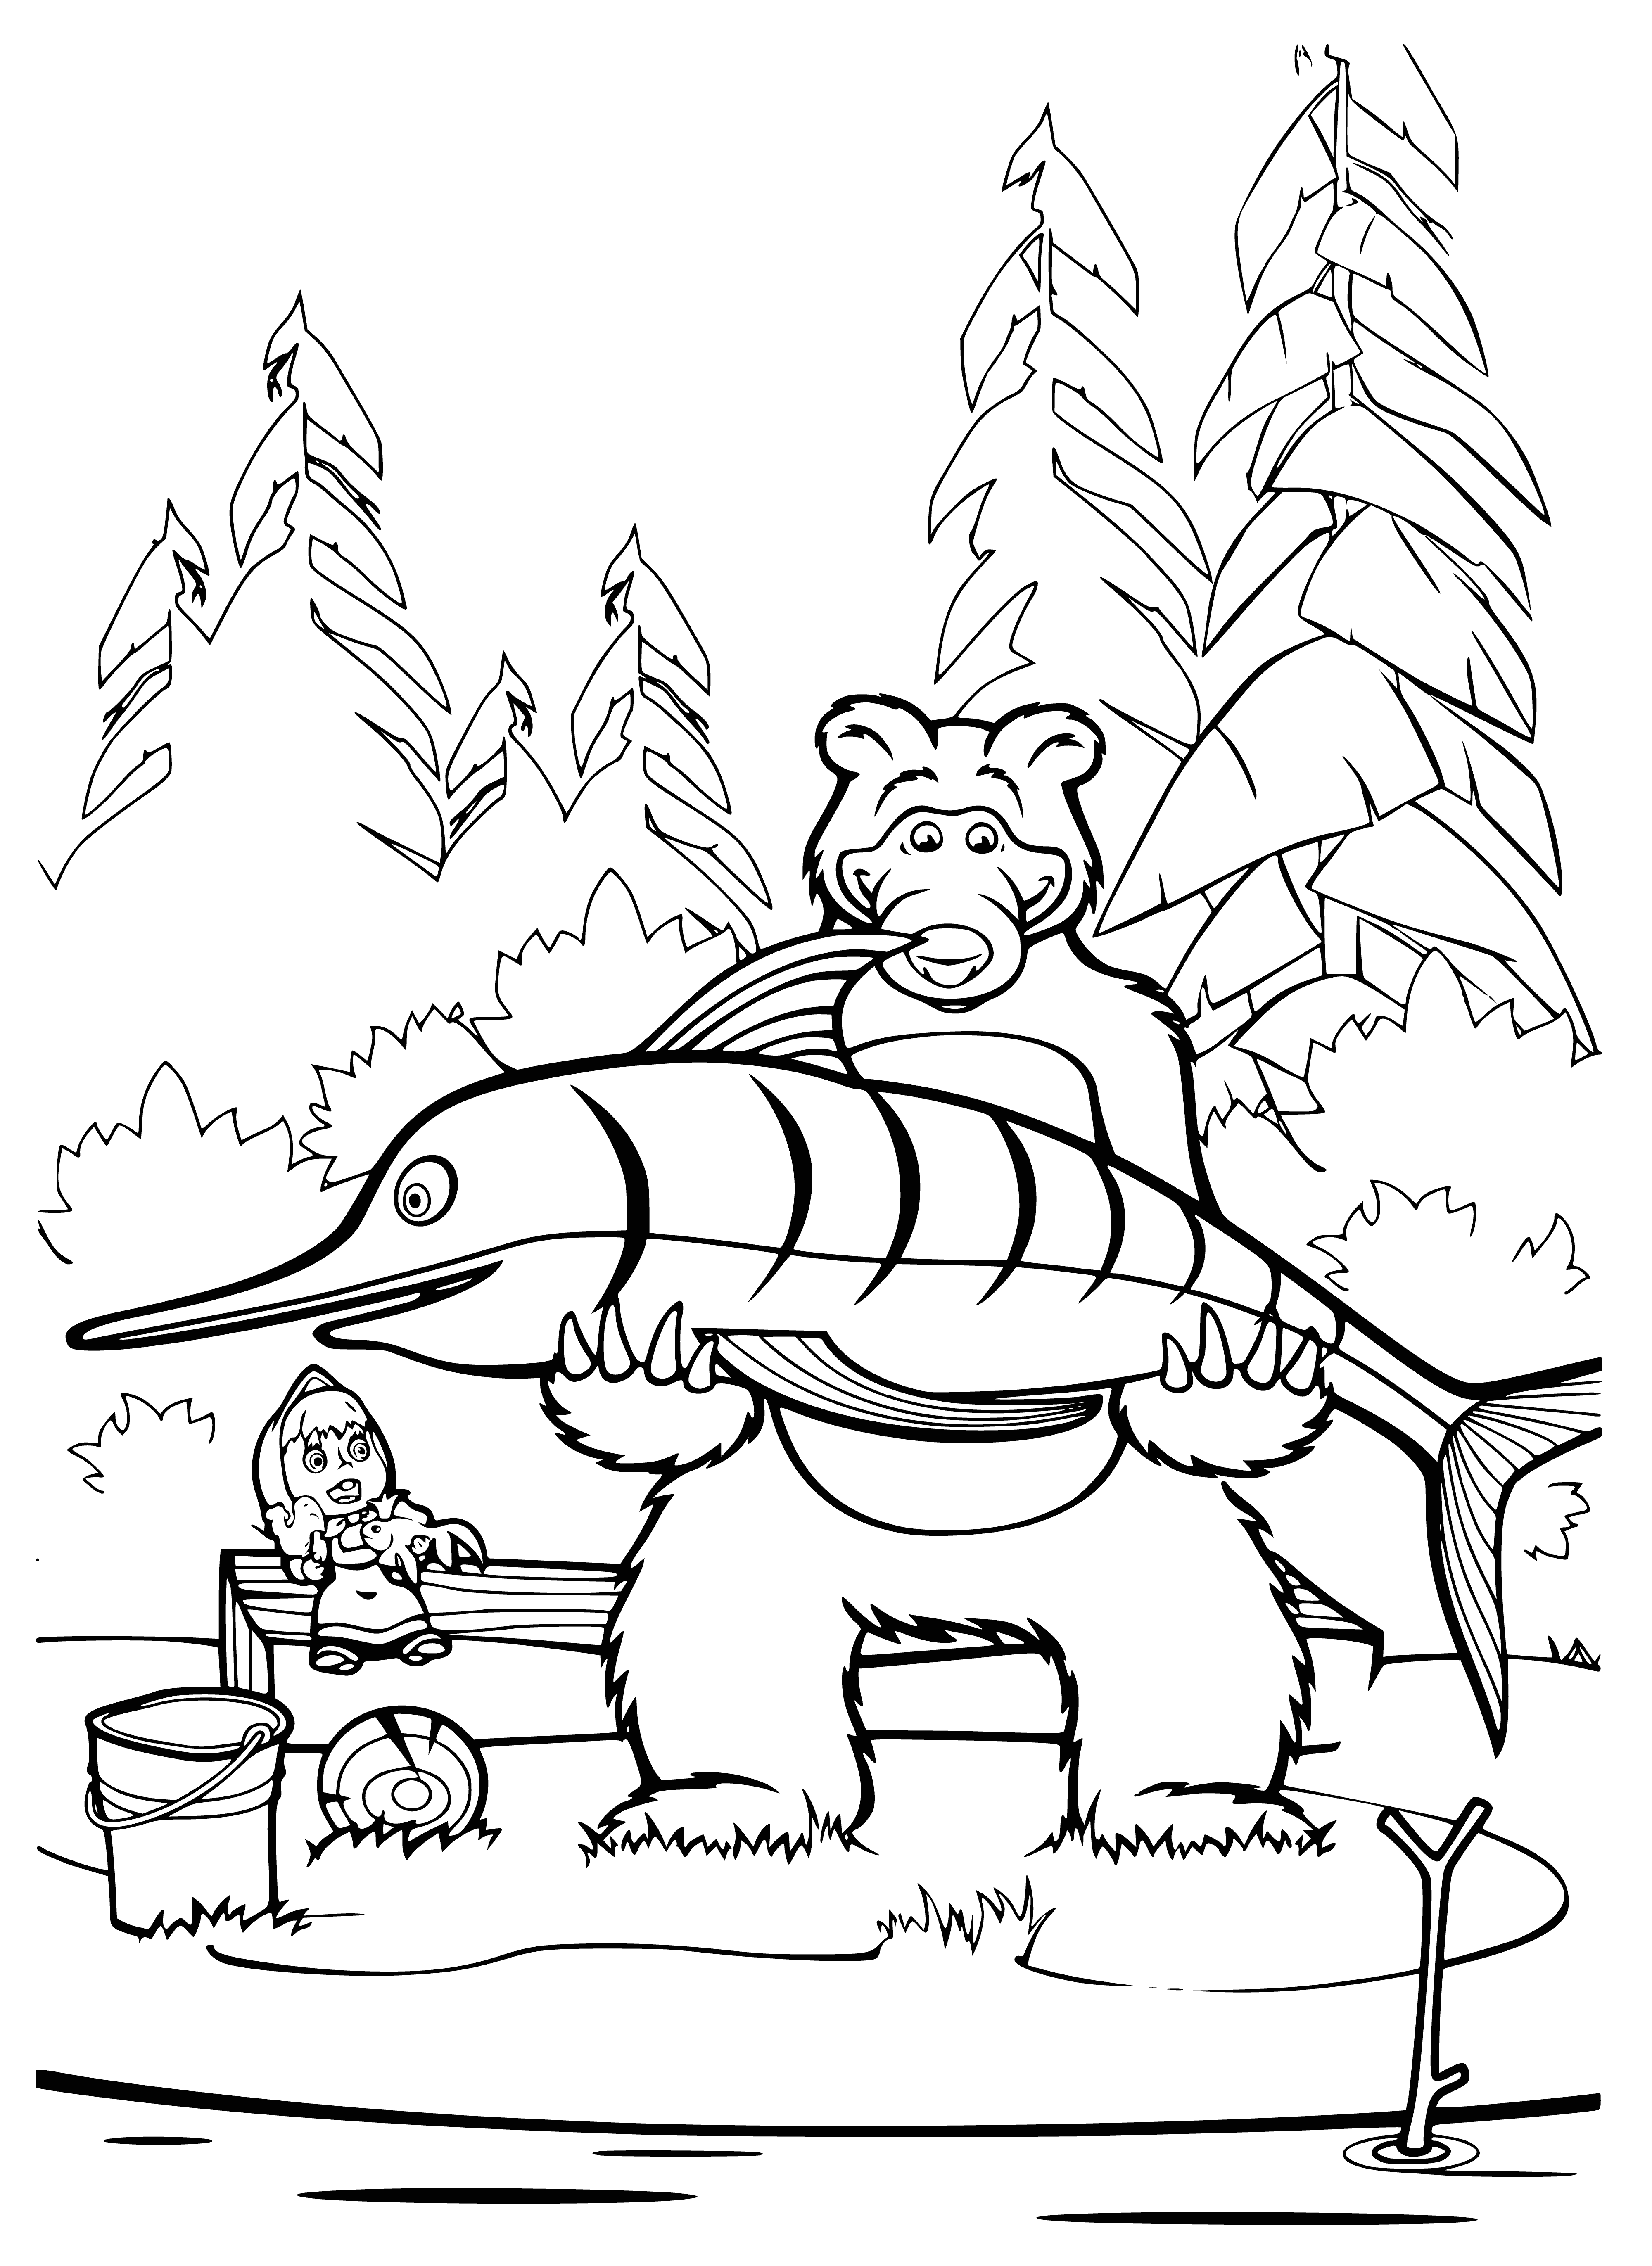 coloring page: Masha and the Bear go on an adventure fishing, Masha catches a fish and they both look happy and excited.